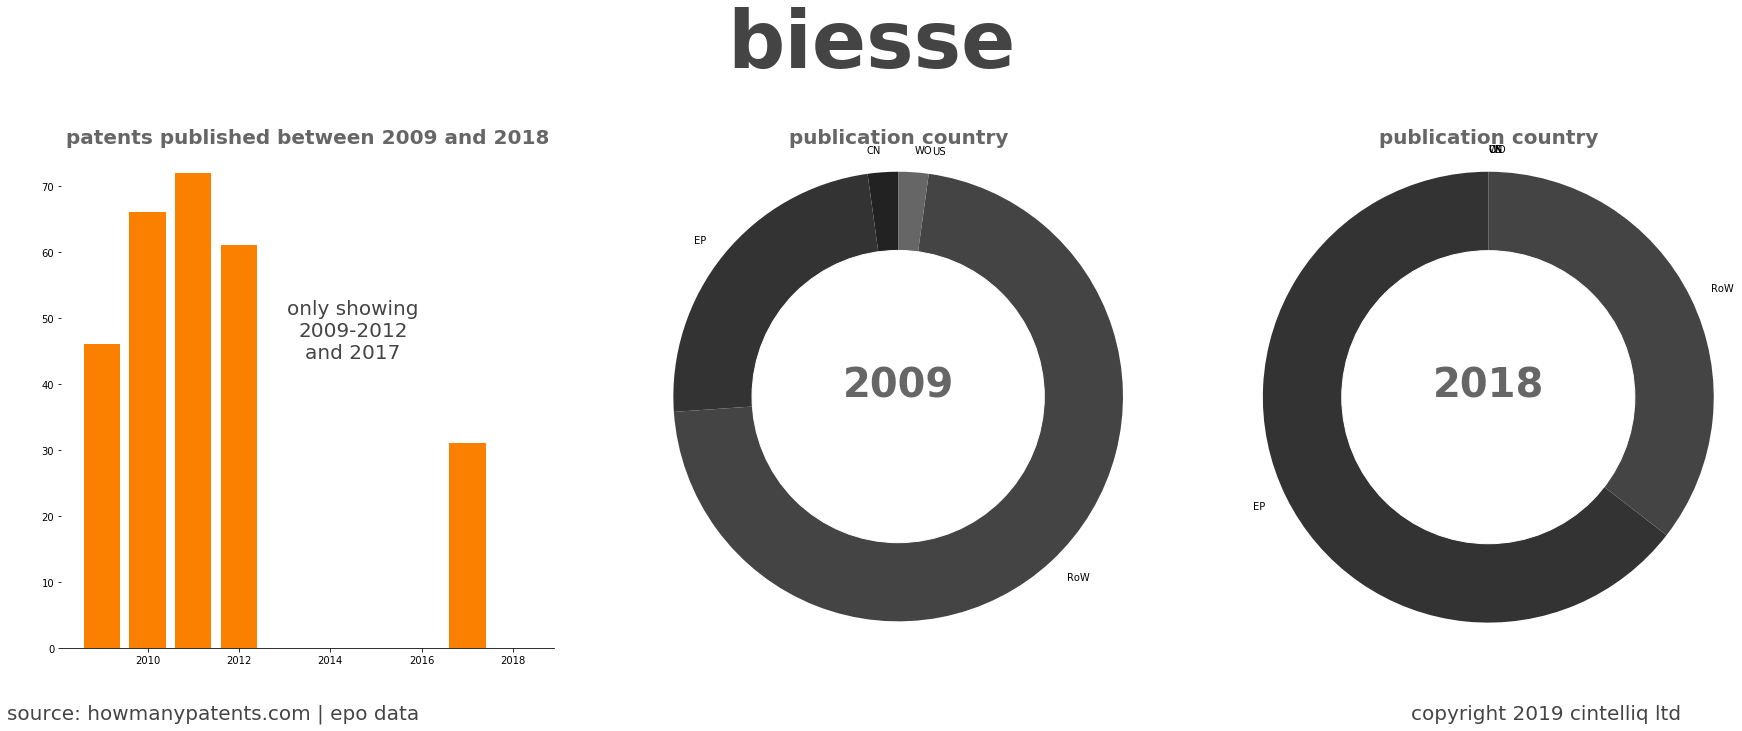 summary of patents for Biesse